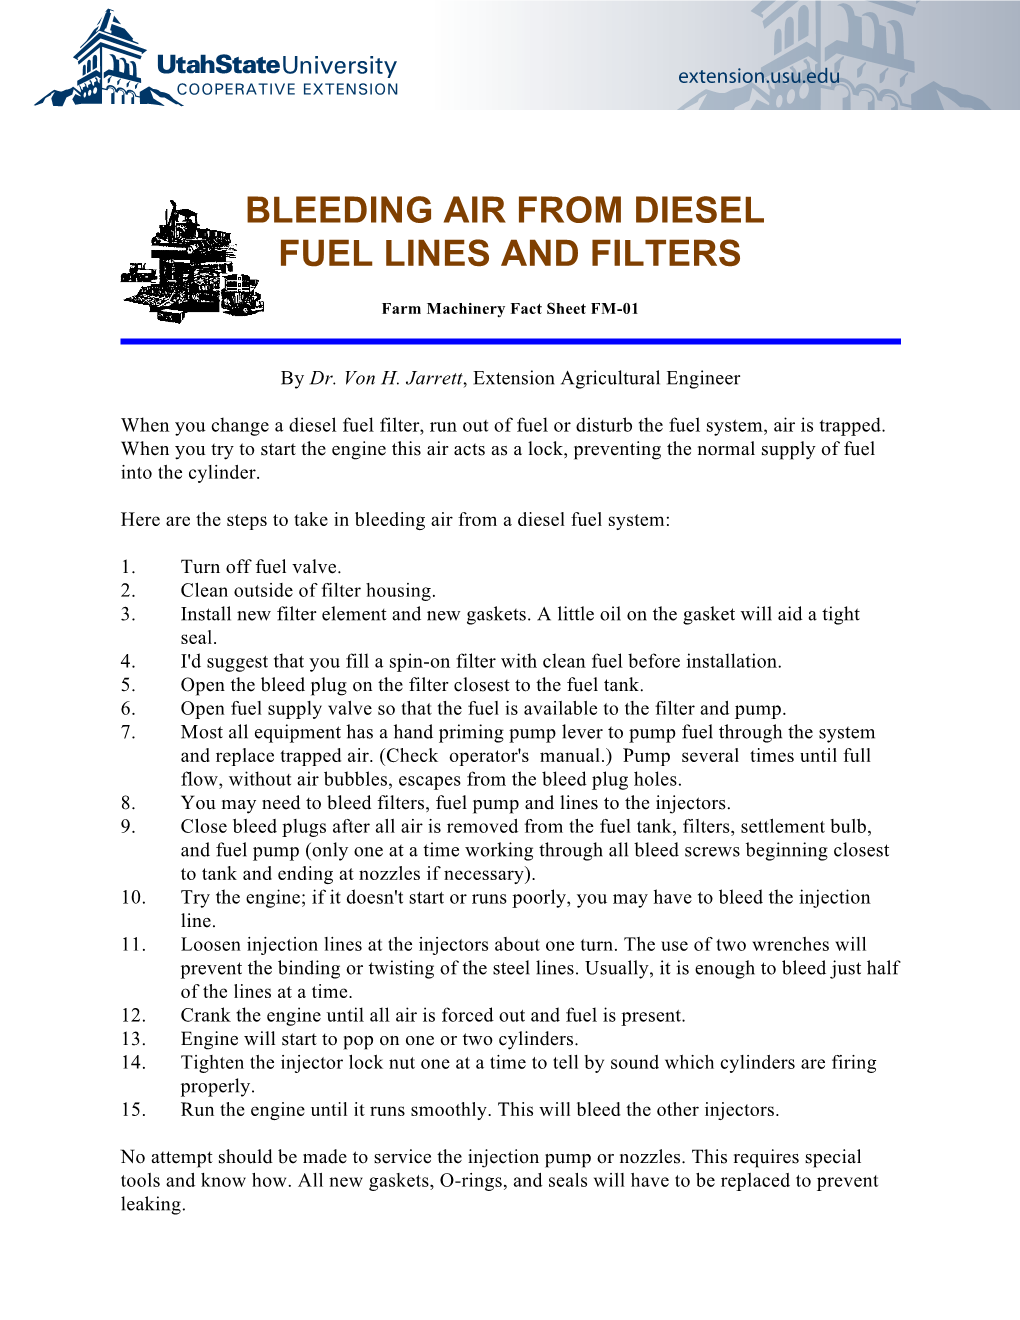 Bleeding Air from Diesel Fuel Lines and Filters